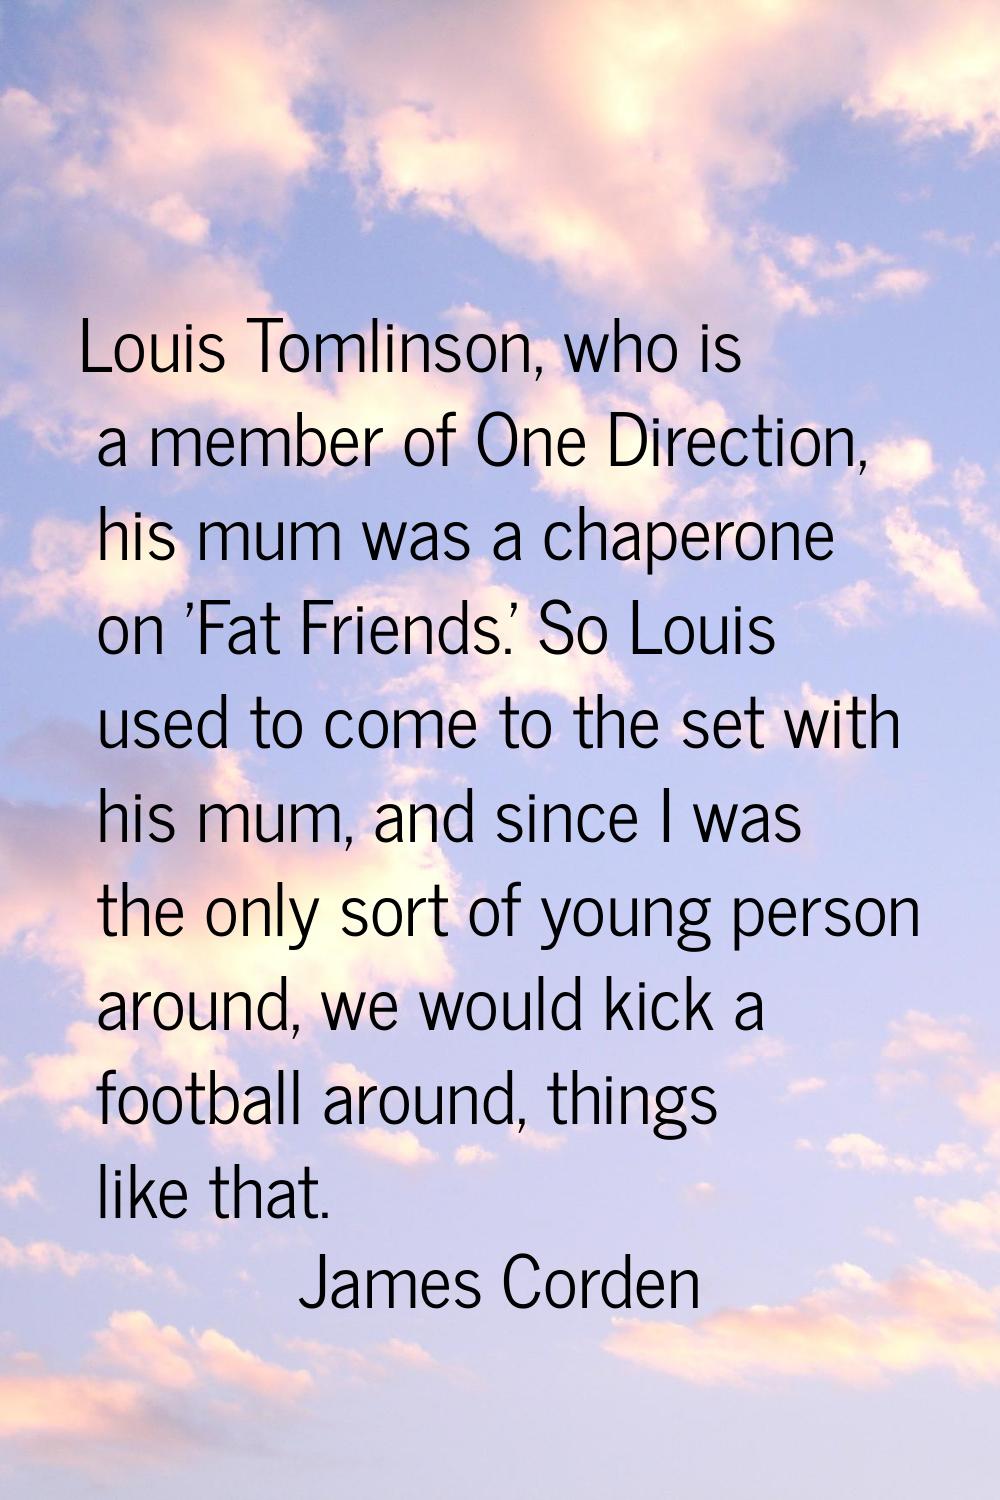 Louis Tomlinson, who is a member of One Direction, his mum was a chaperone on 'Fat Friends.' So Lou